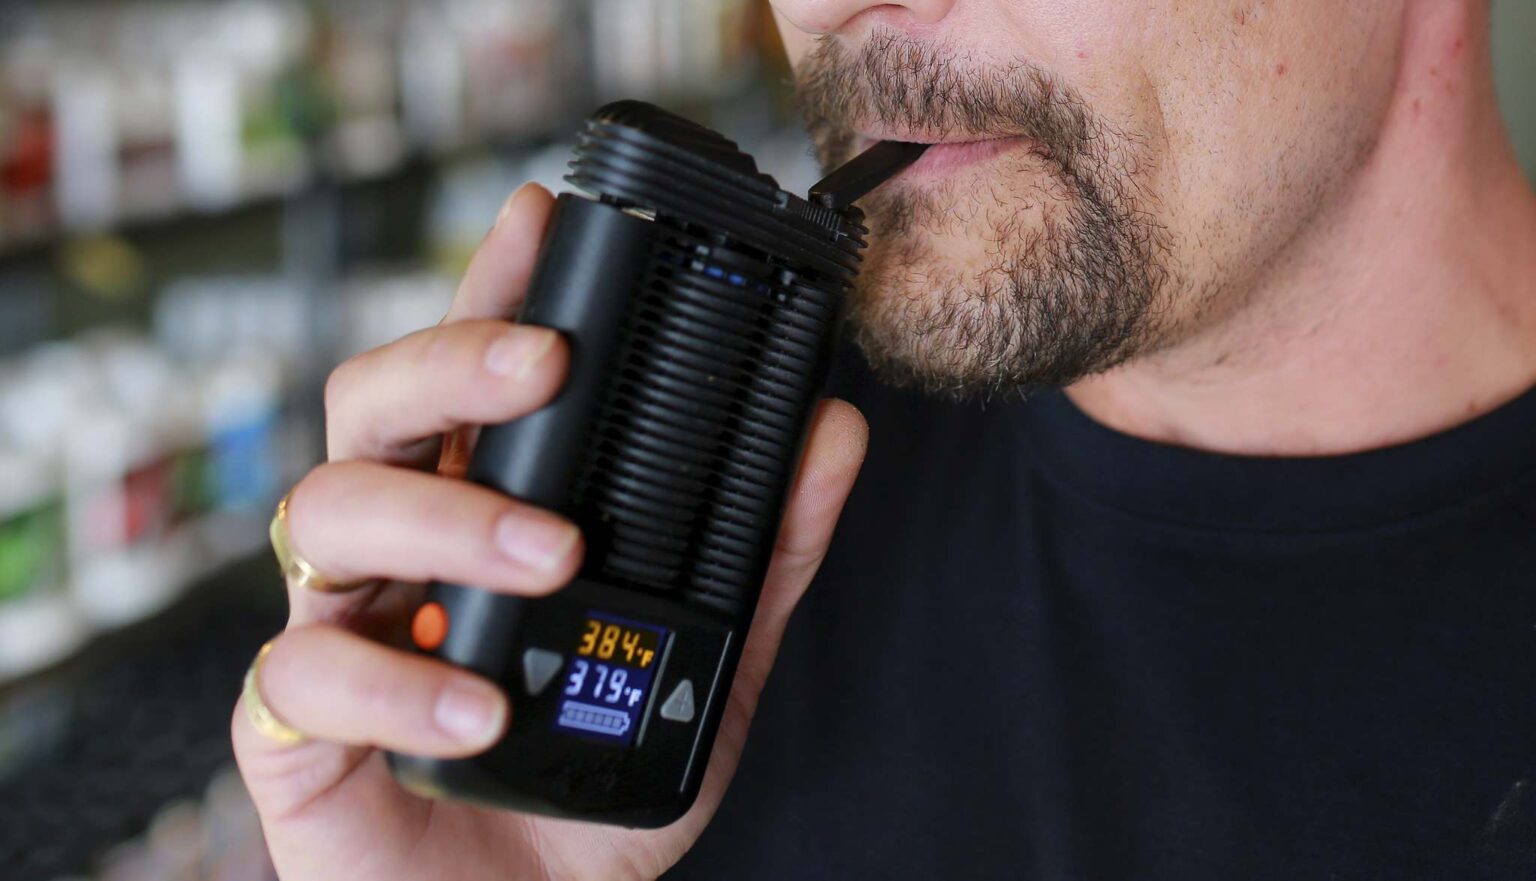 It can be tough to find the right vaporizer for you. Here are some tips on how to find a vaporizer for dry herbs and concentrates.